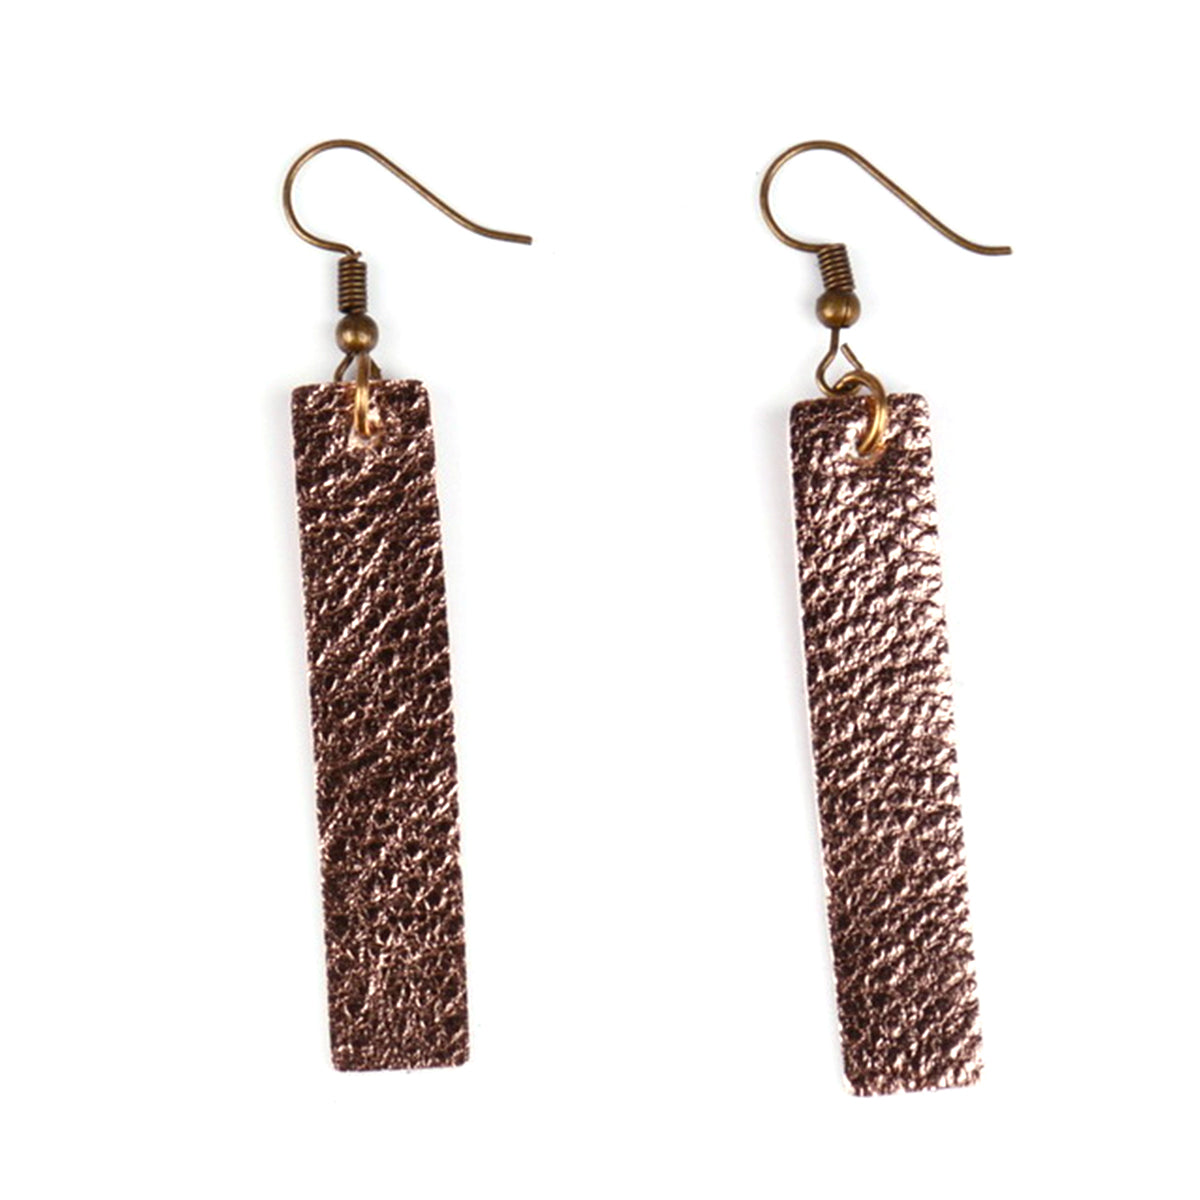 Leather Strip Earrings inspired by Joanna Gaines